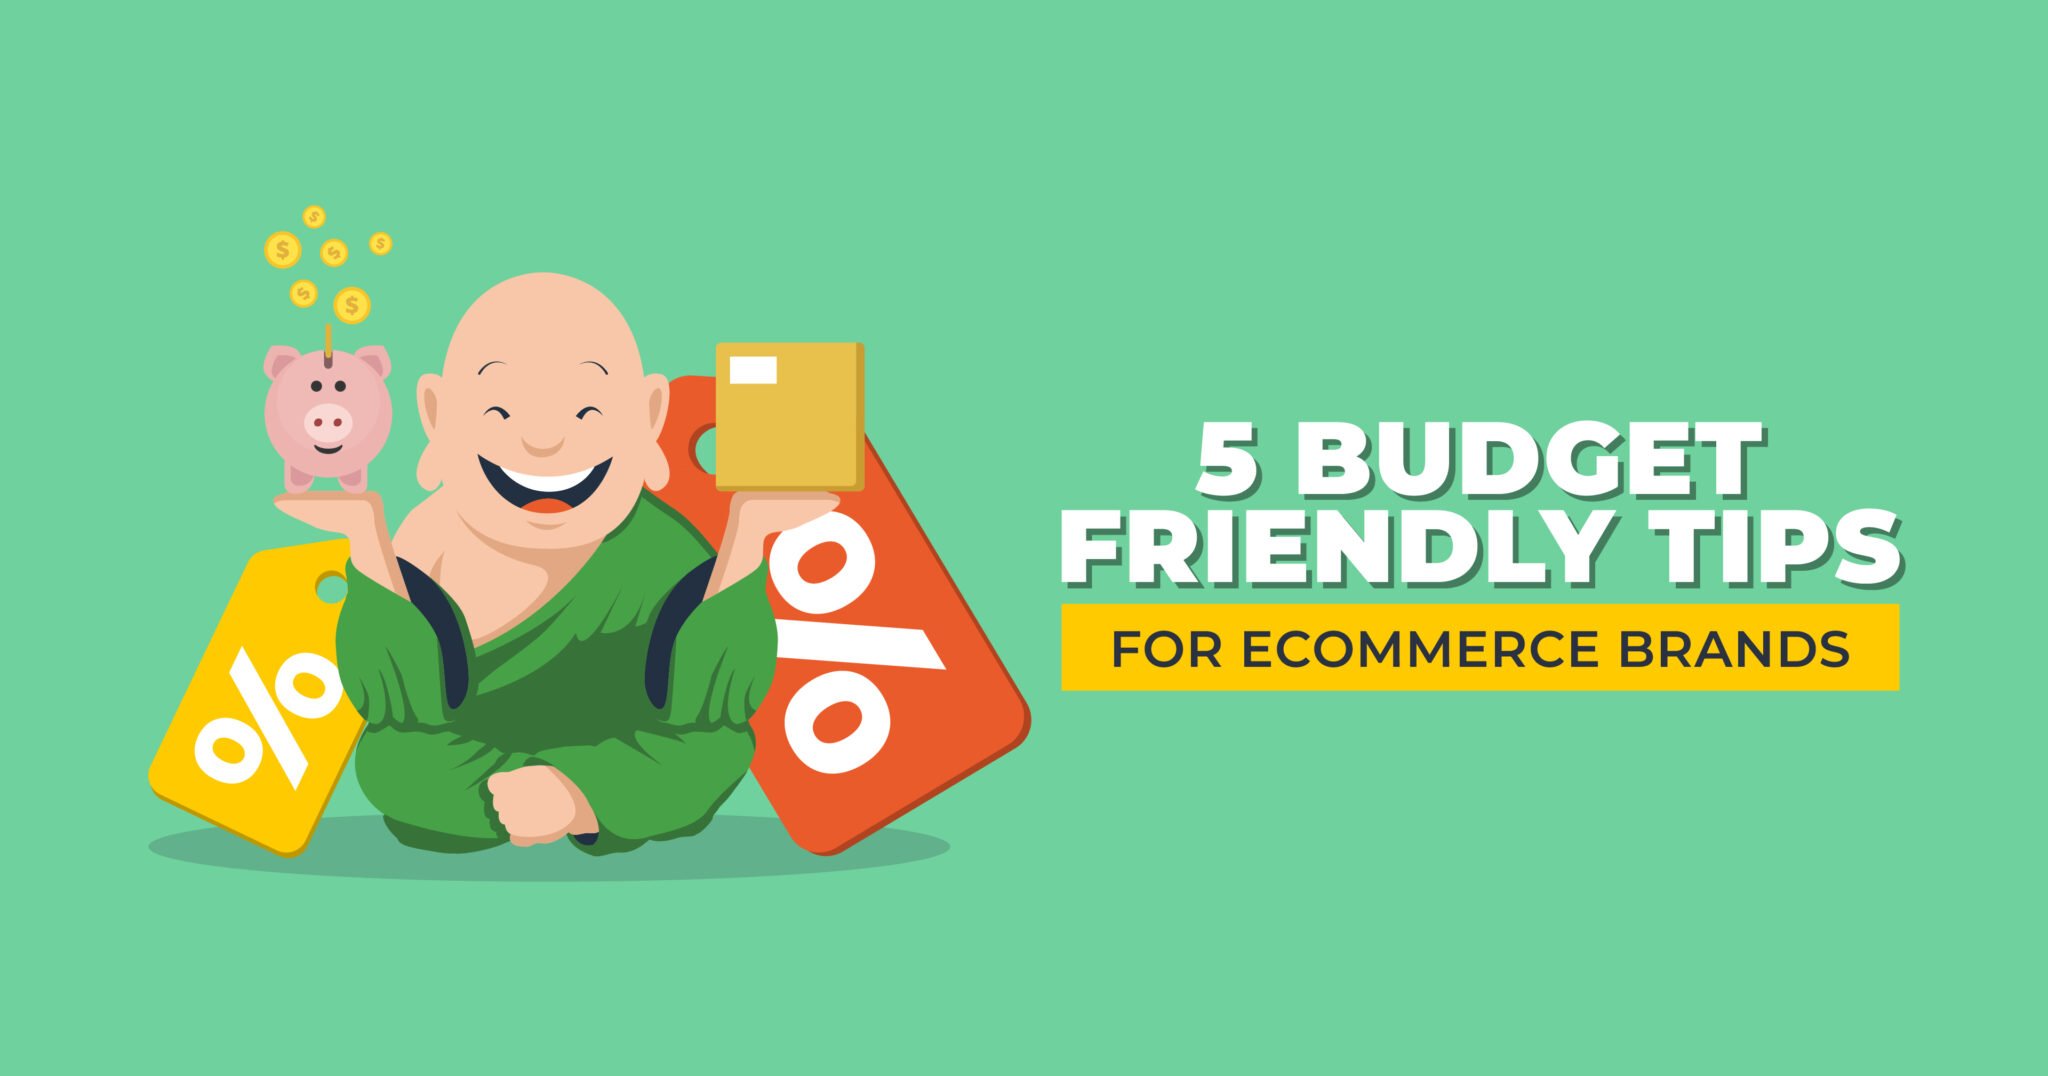 5 Budget-Friendly Tips for Ecommerce Brands